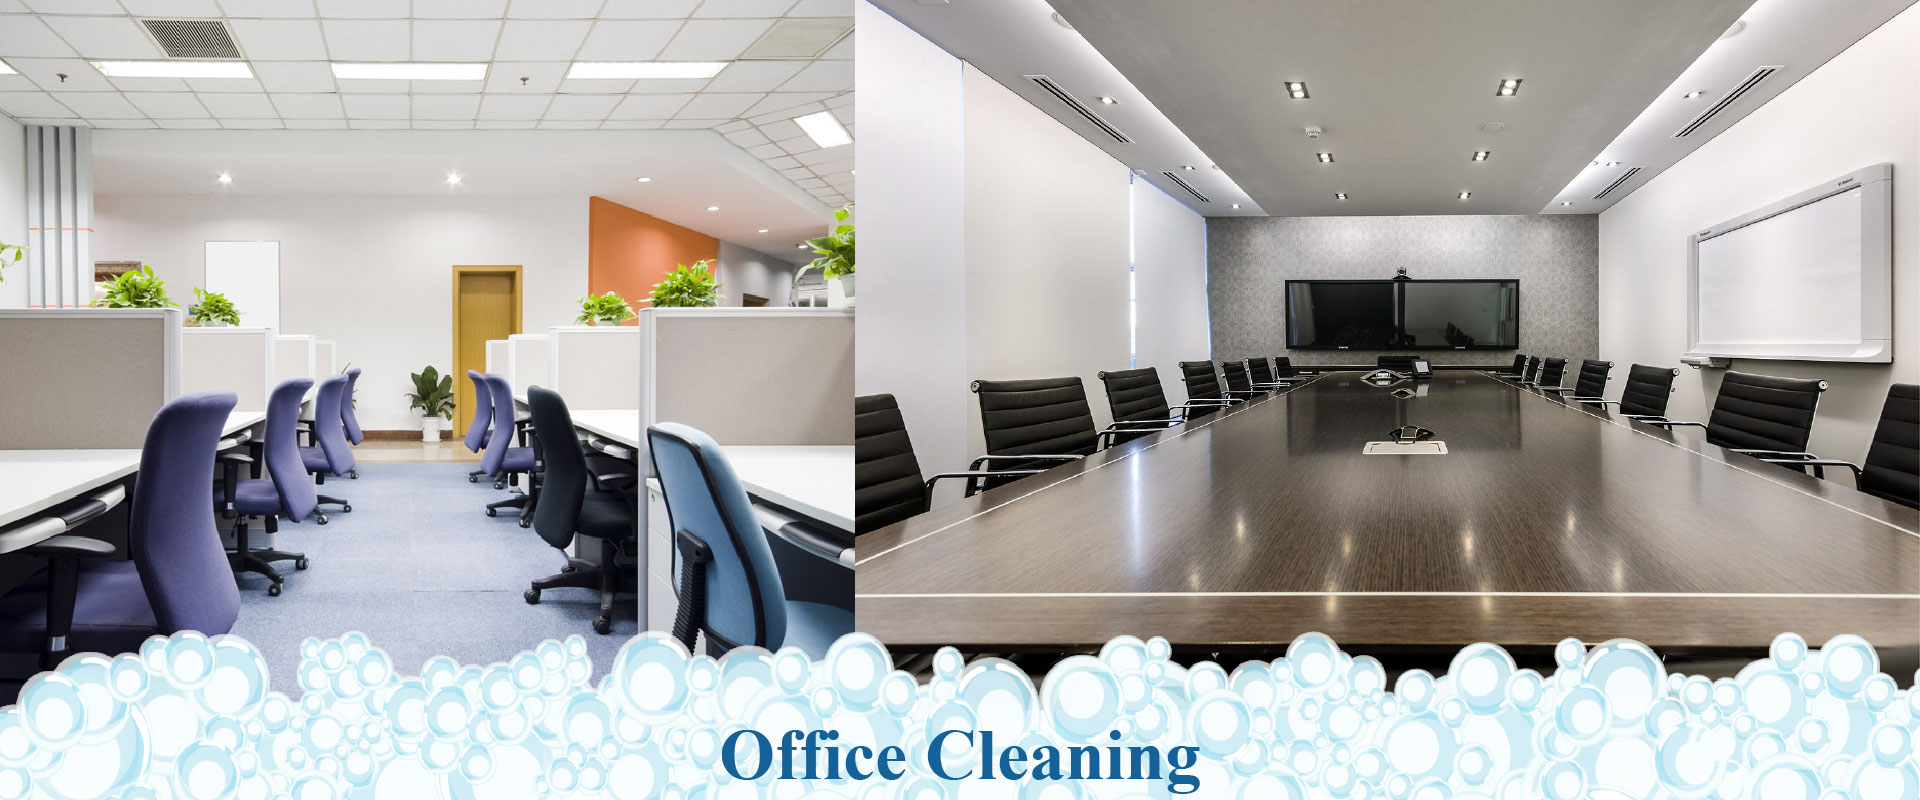 https://www.candccpw.com/img/office-cleaning.jpg